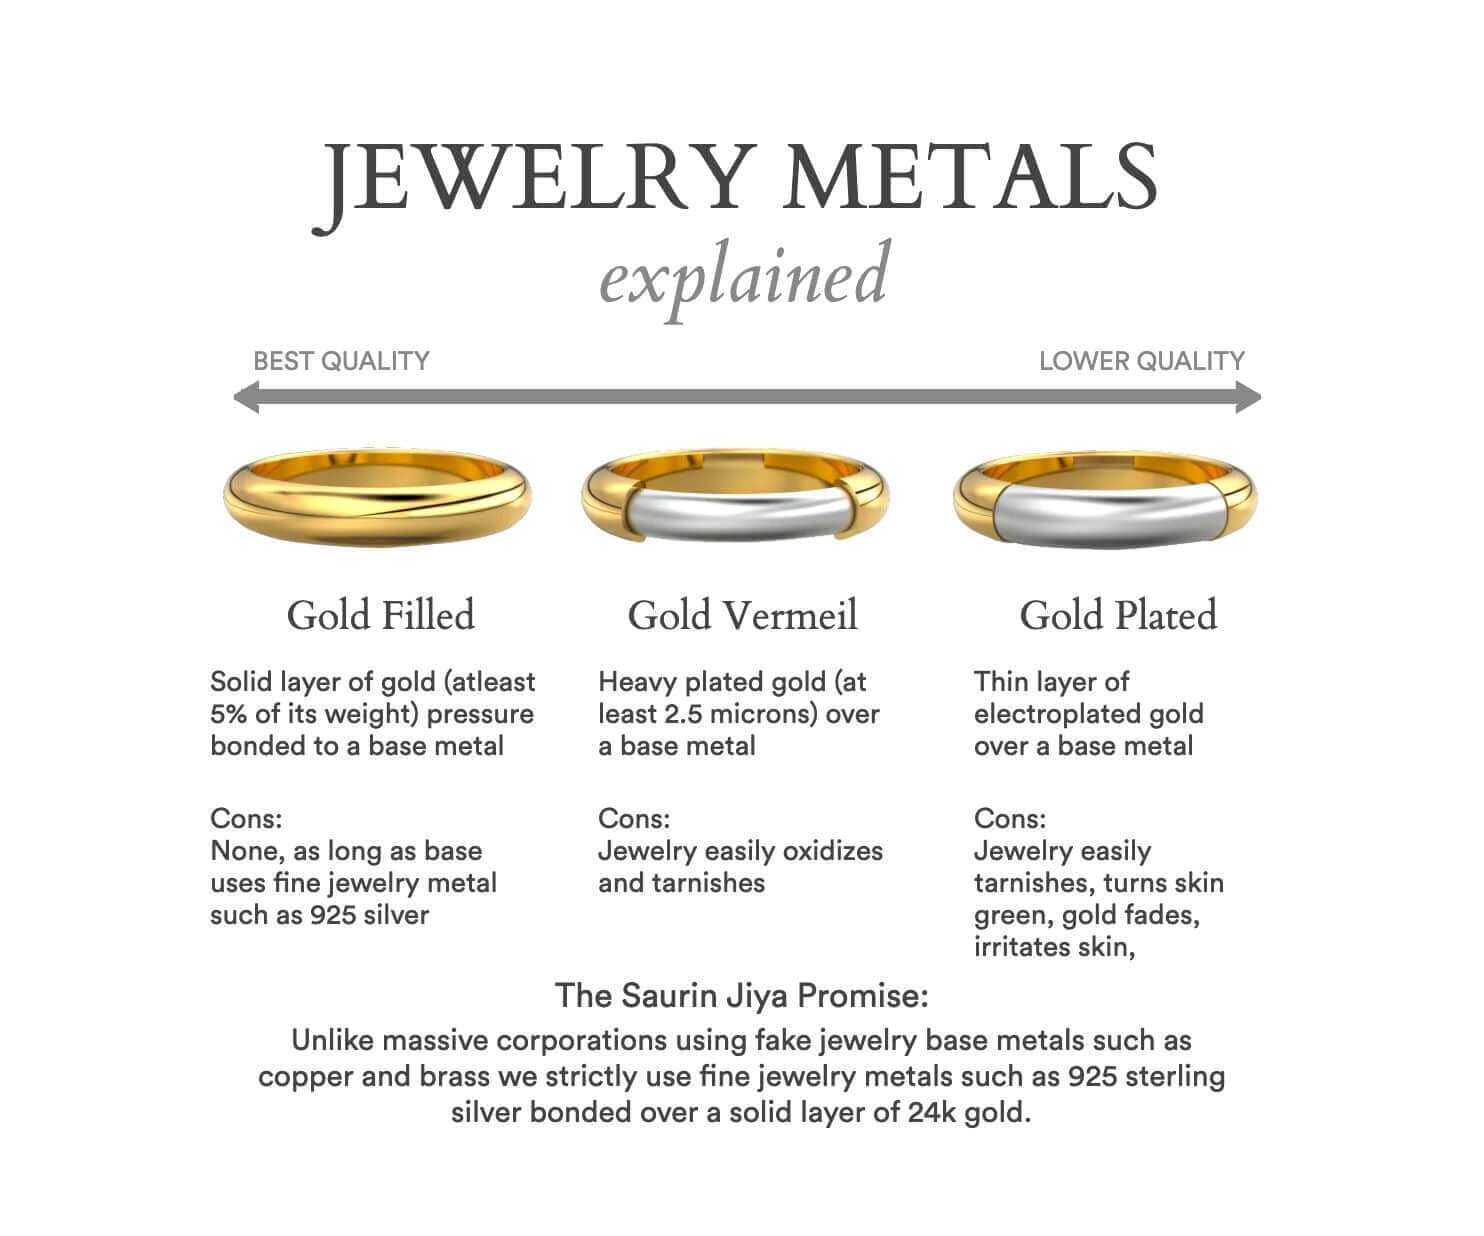 Gold Vermeil vs Gold Filled: What's the Difference